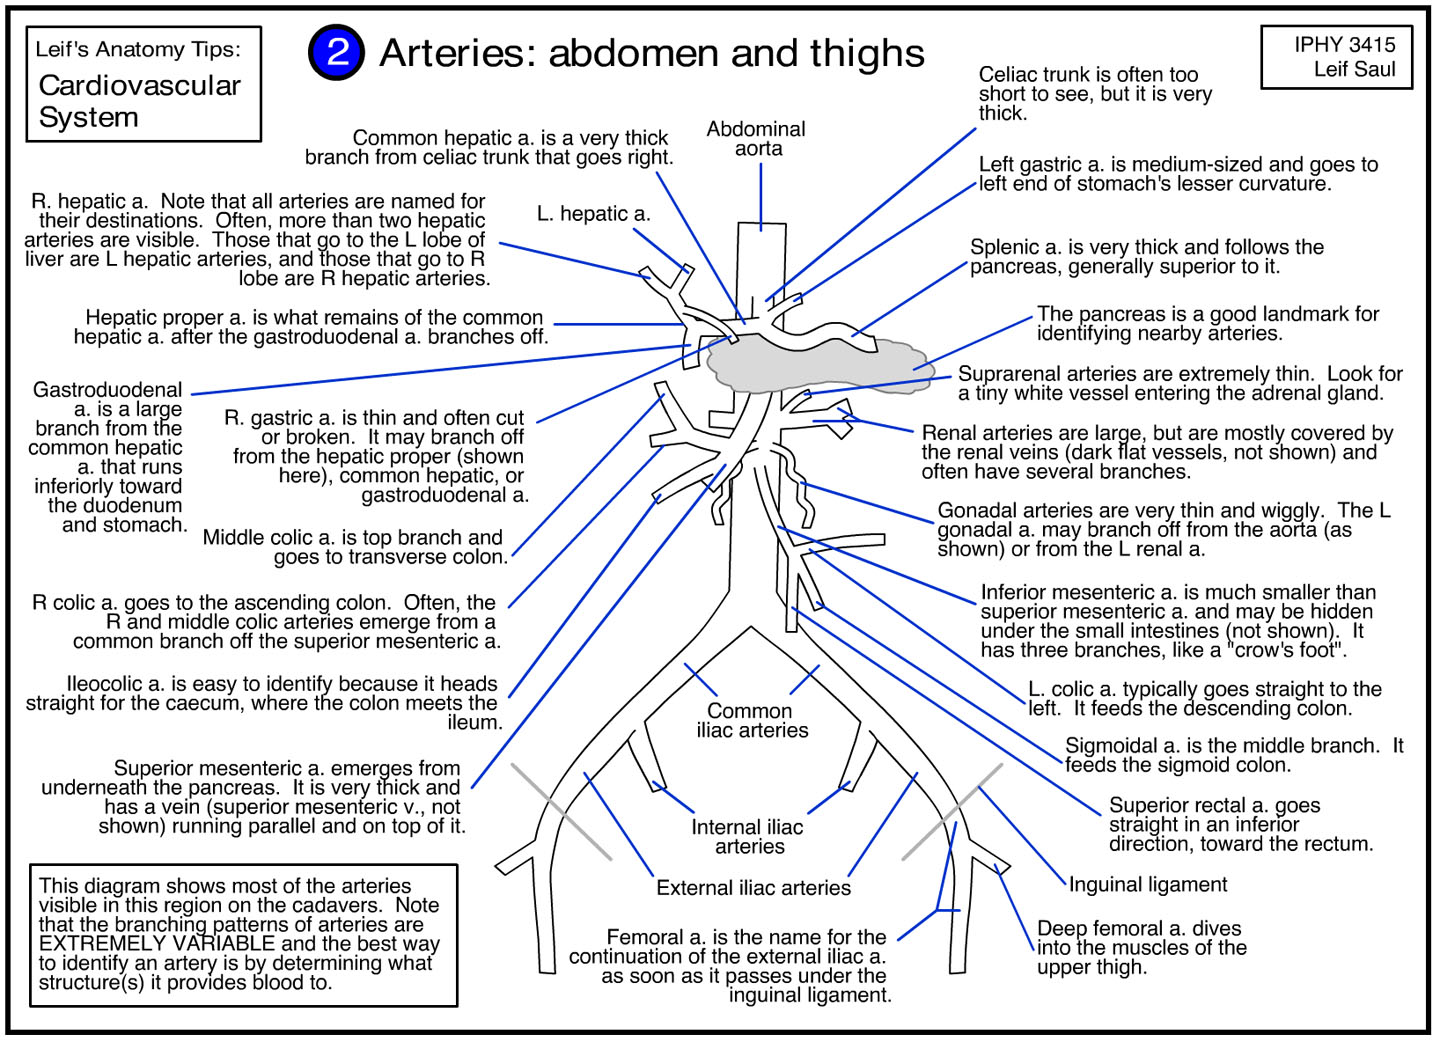 arteries of abdomen and thighs